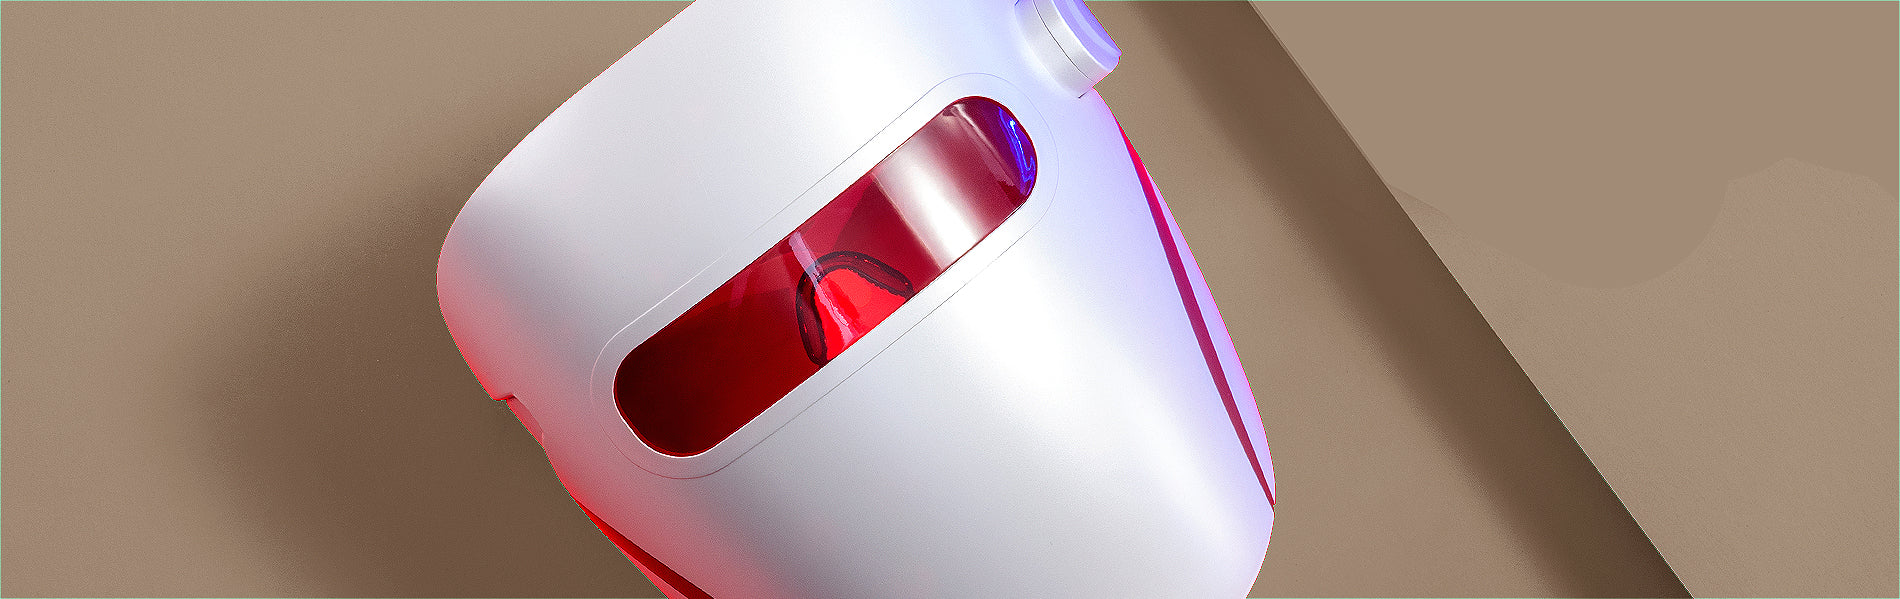 Lumamask 7 LED Light Therapy: A Review by Lavinia Rusanda